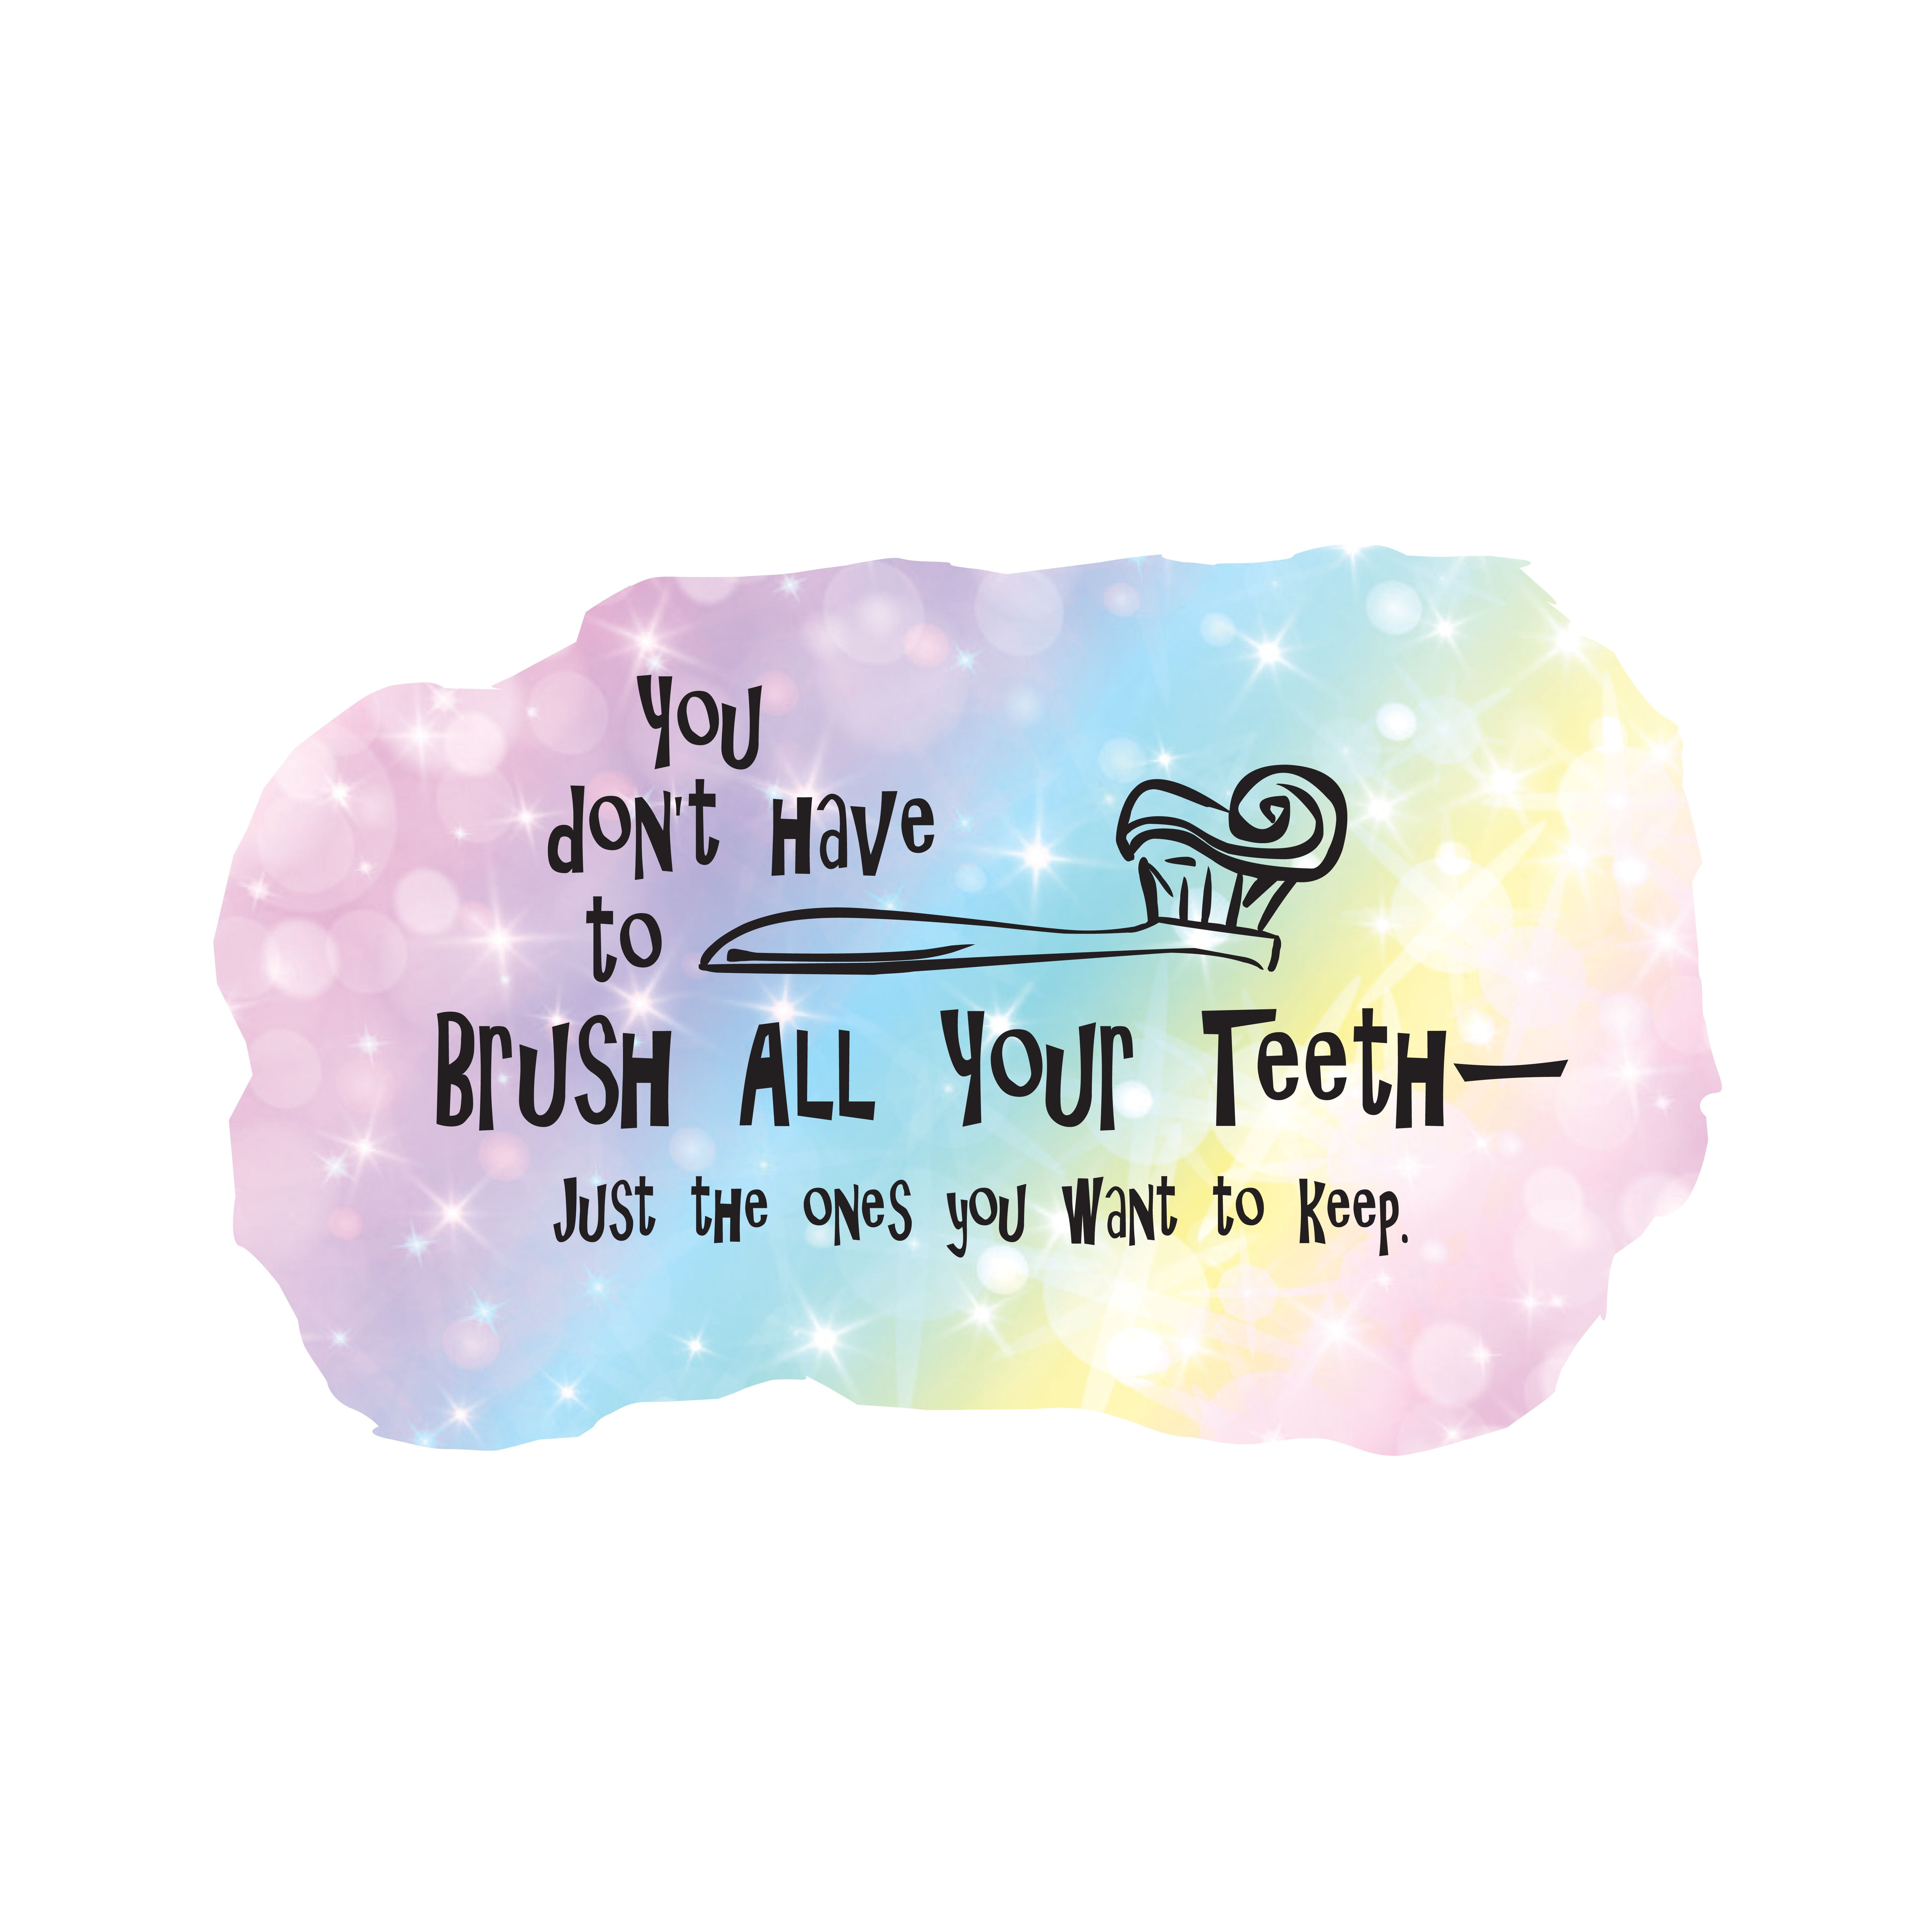 QUOTES - Kids Bathroom Funny Dental Quotes Lettering Art ...